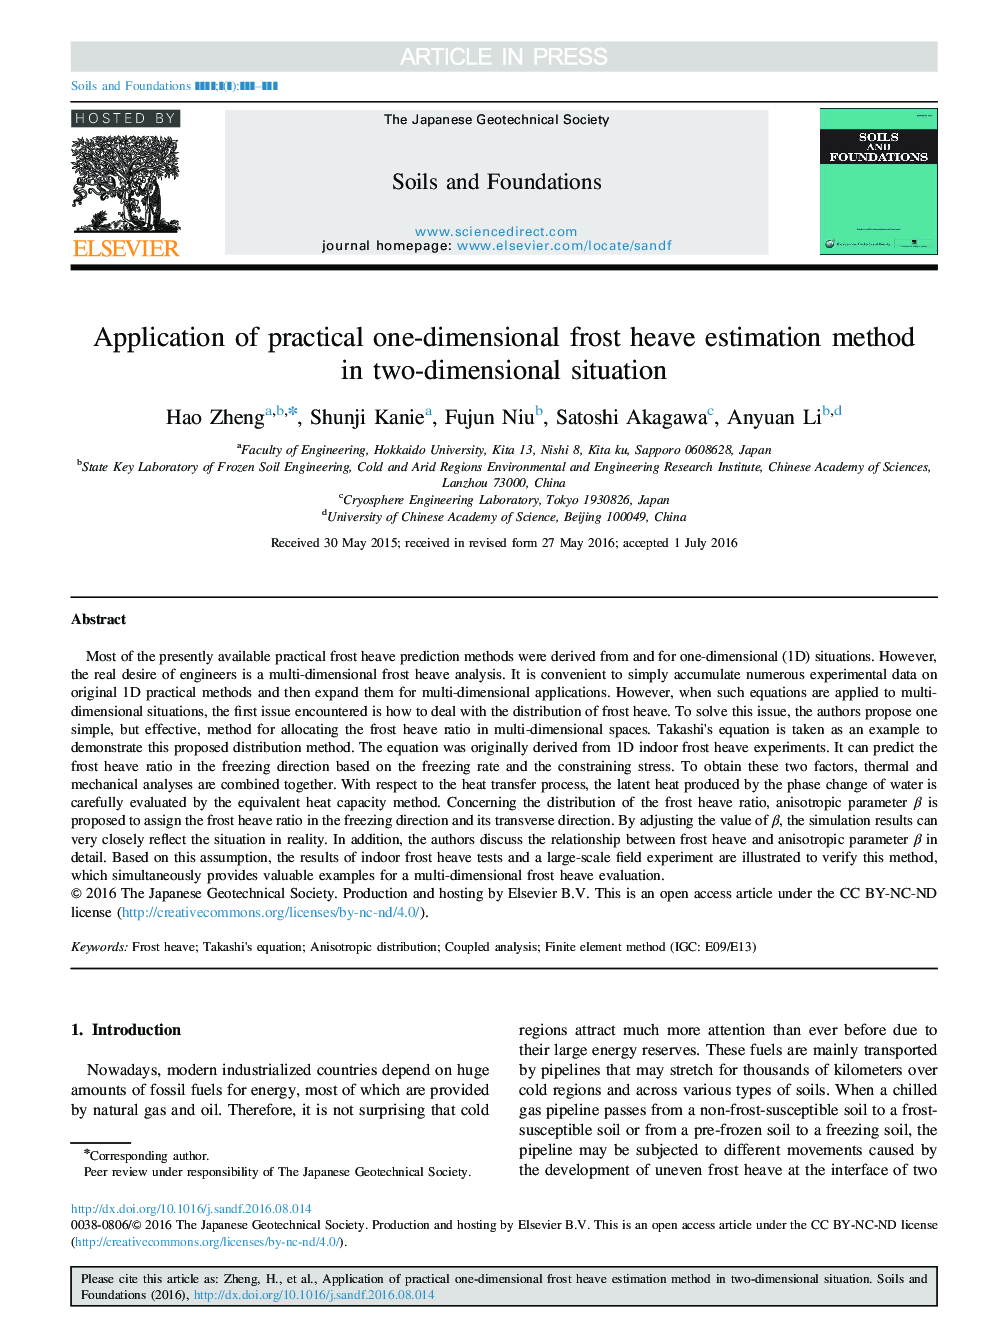 Application of practical one-dimensional frost heave estimation method in two-dimensional situation